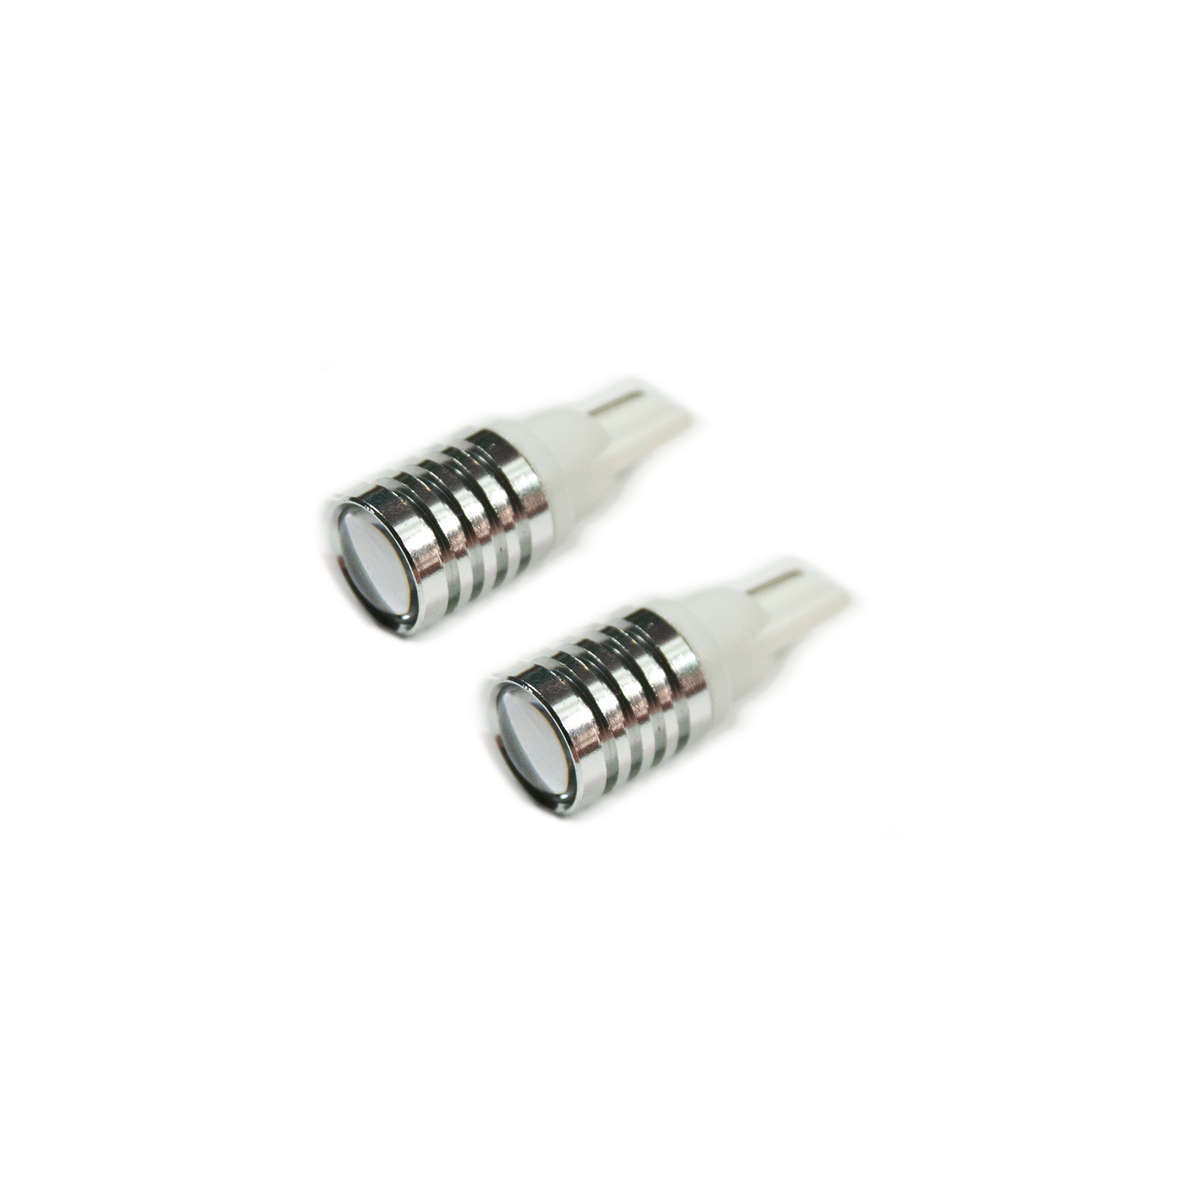 ORACLE LIGHTING T10 3W Cree LED Bulbs Pair Cool White